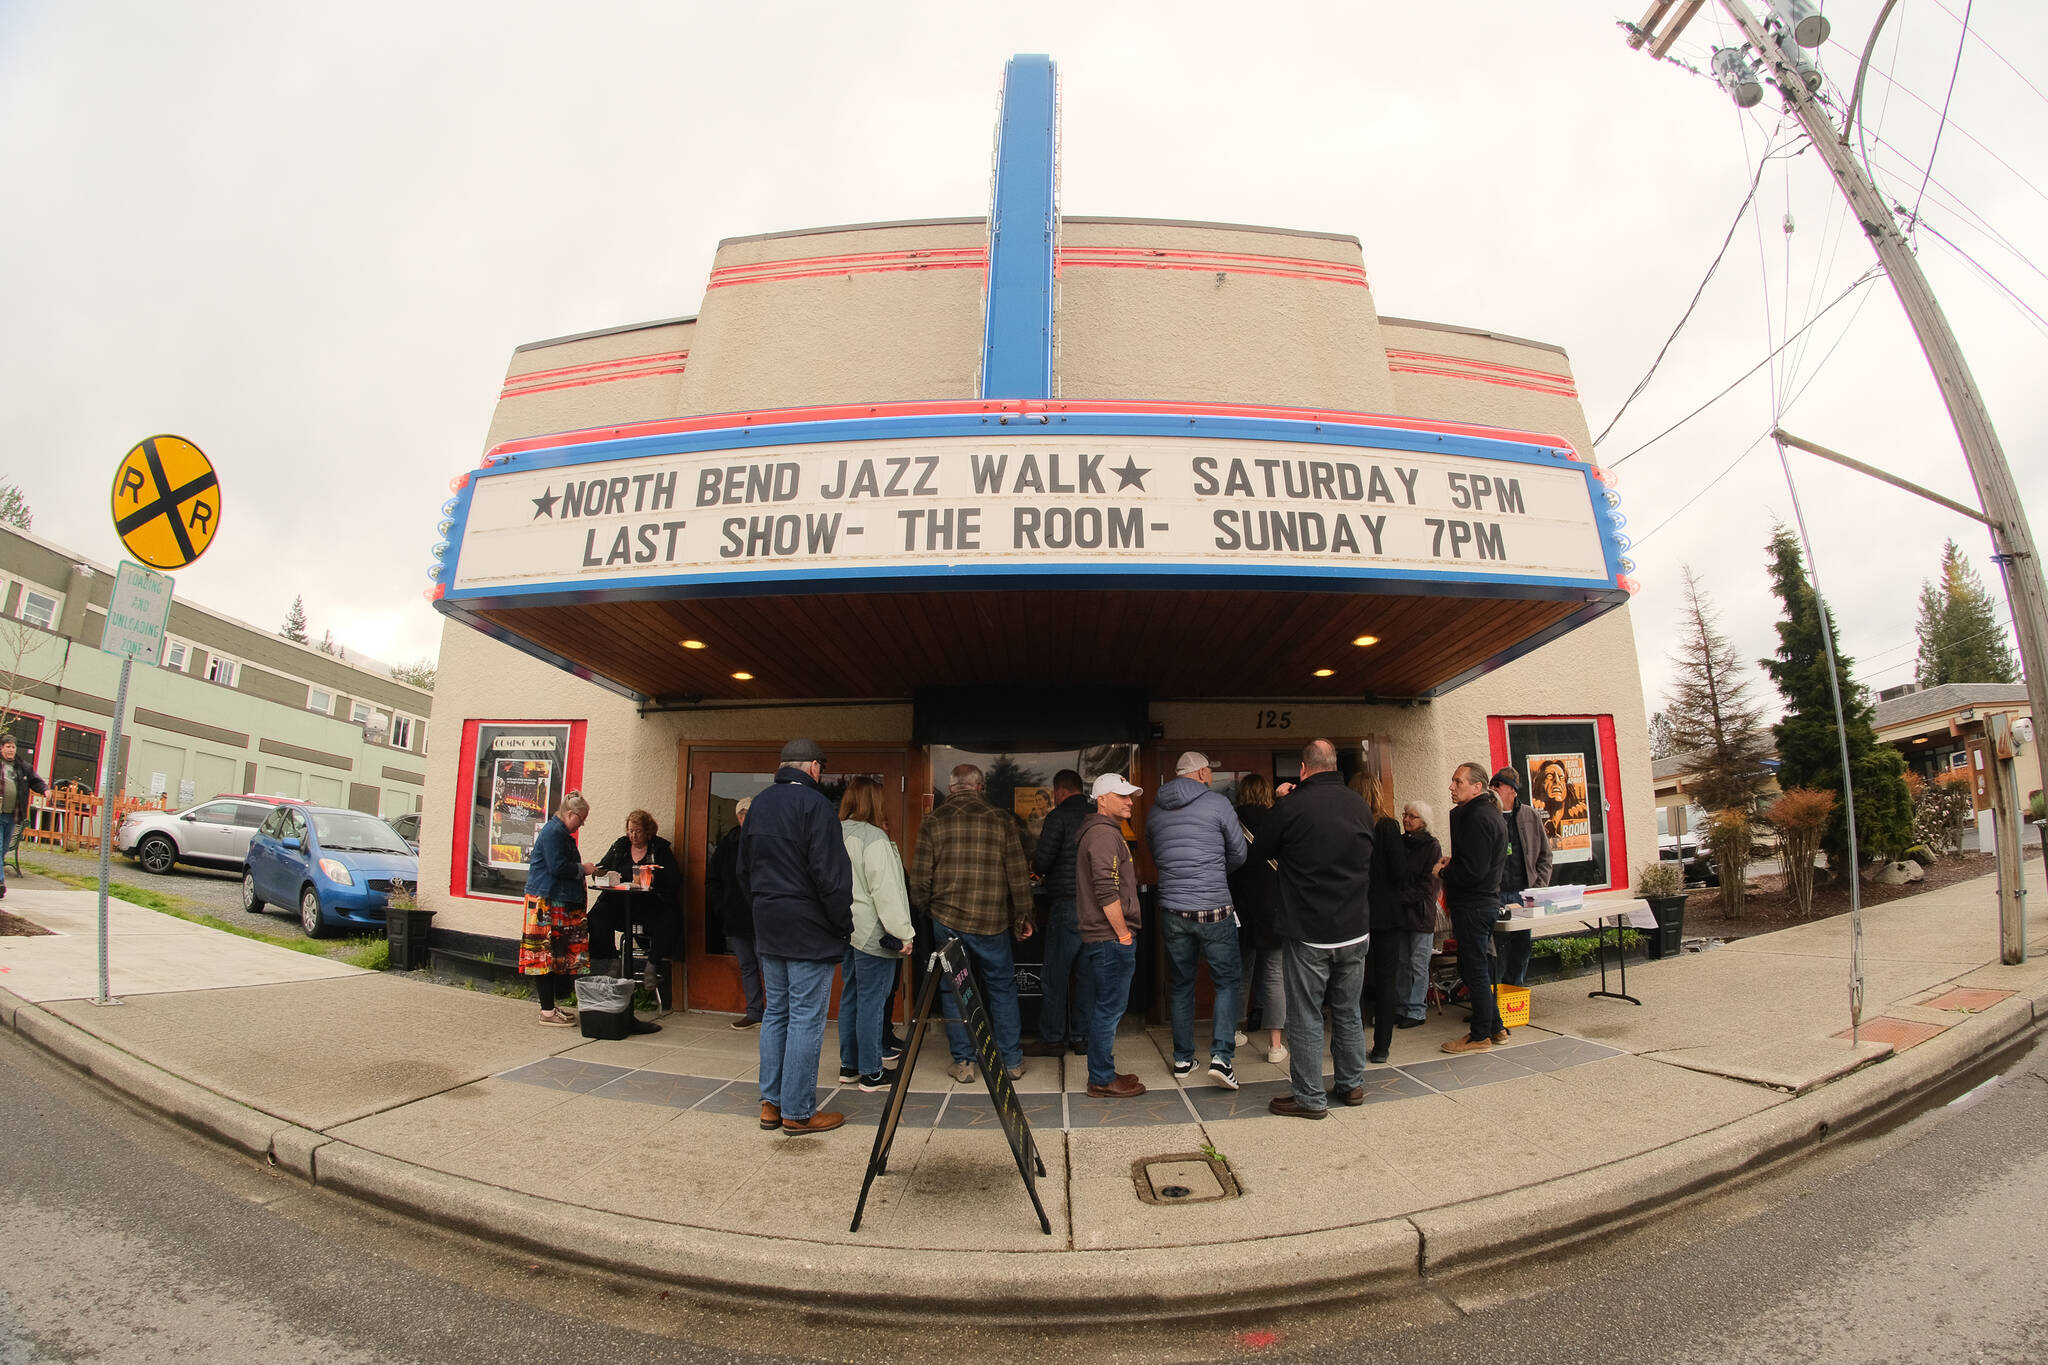 The thirteenth annual North Bend Jazz Walk was held April 27. Nineteen venues throughout downtown North Bend hosted 28 jazz bands with at least 100 total musicians from 5 p.m. to midnight. Learn more at northbendjazzwalk.com. Pictured: Excited guests hide from the rain under the cover of the North Bend Theatre.